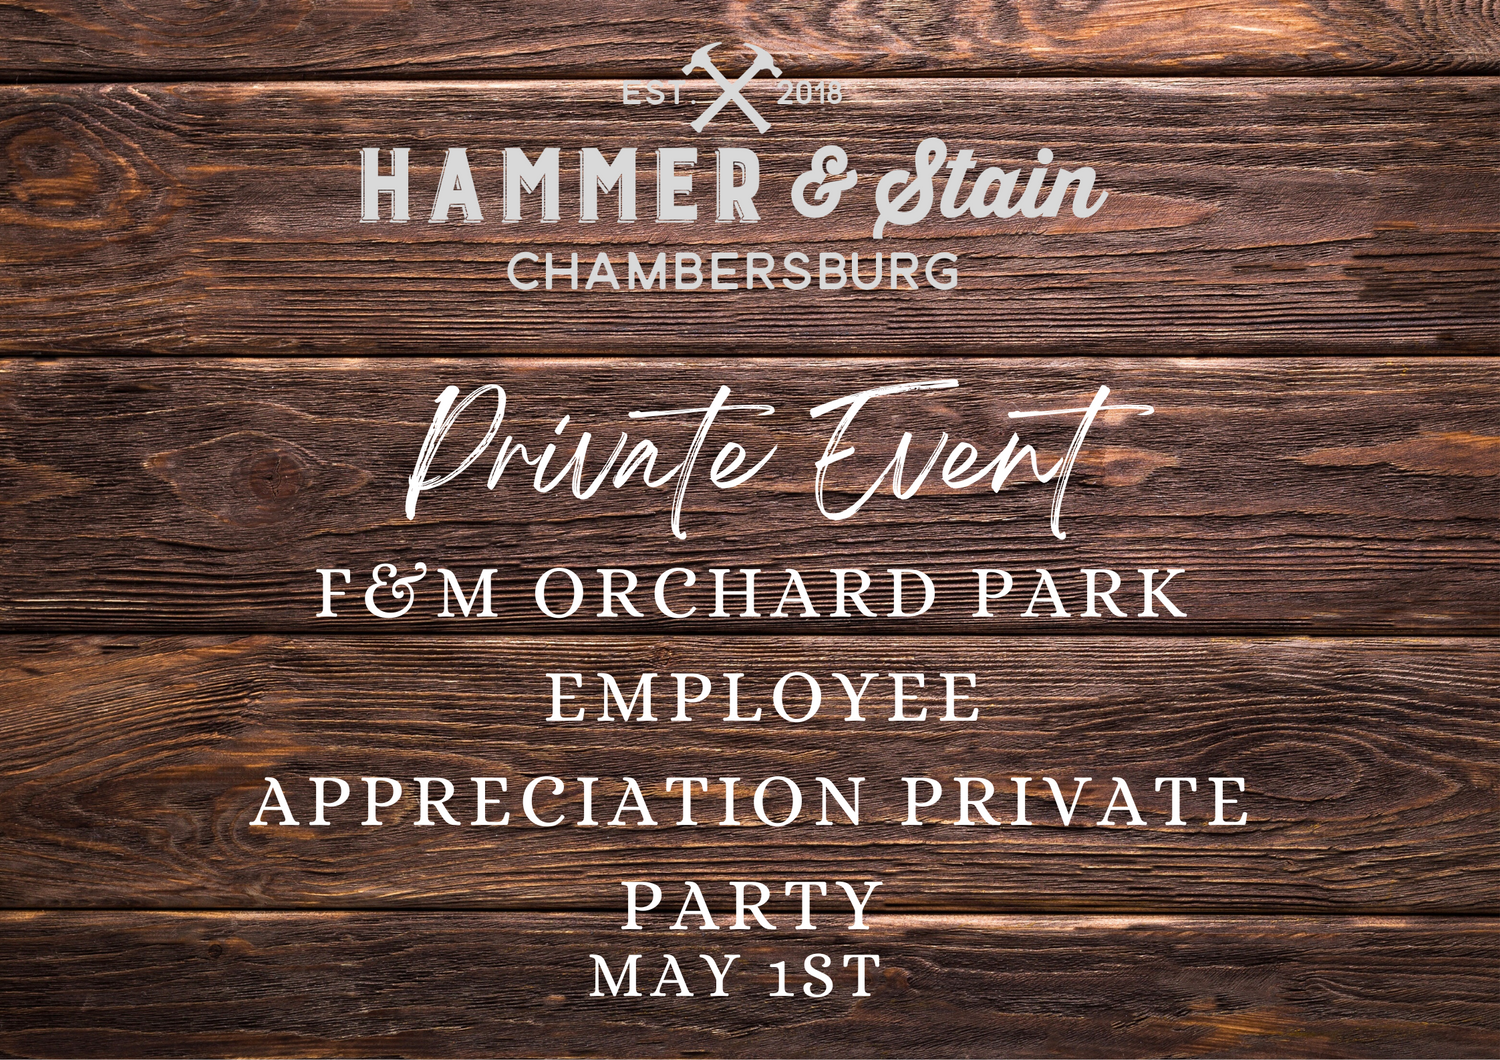 05/01/24 F&M Orchard Park Employee Appreciation Private Party 3:15p